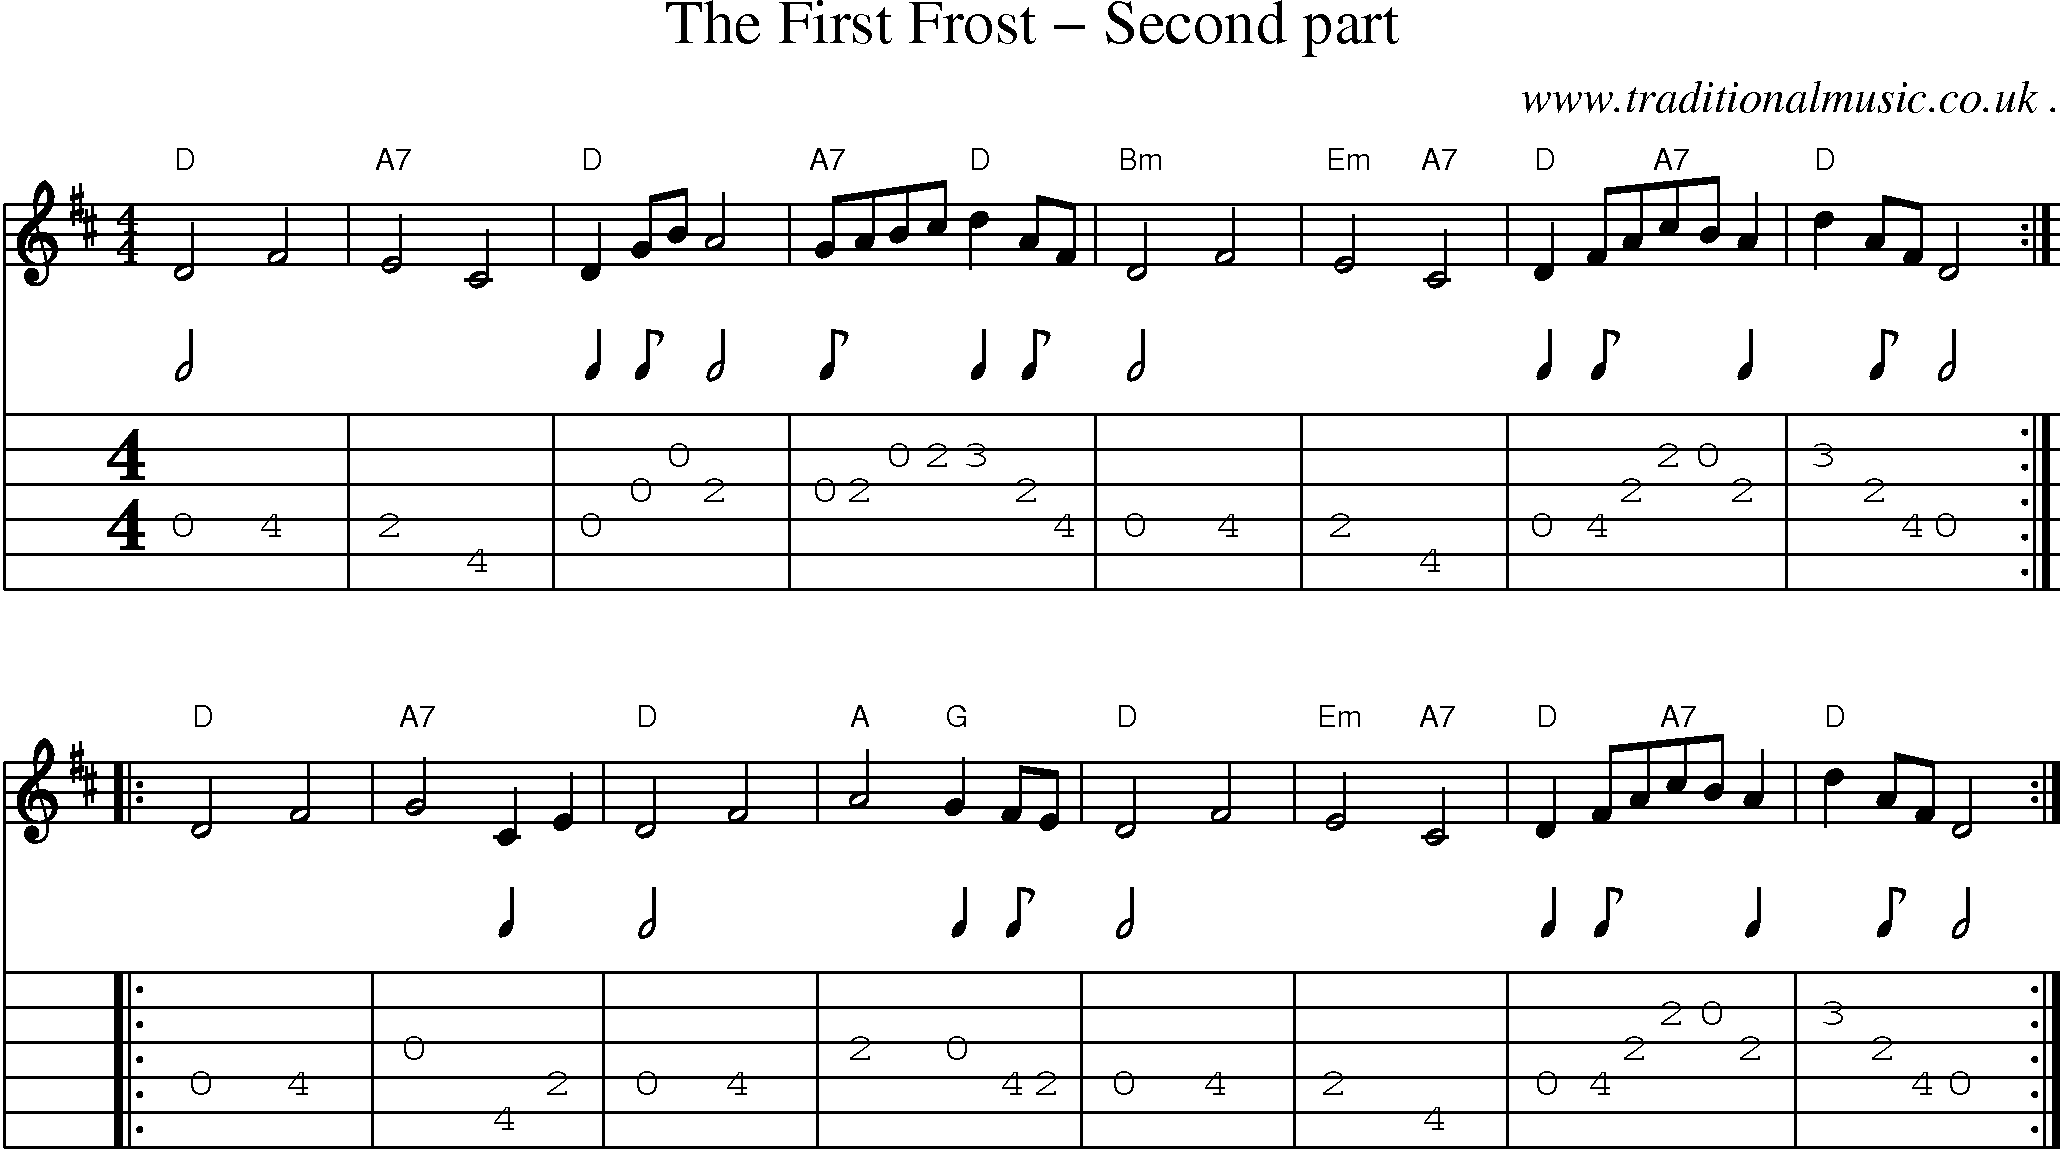 Sheet-Music and Guitar Tabs for The First Frost Second Part